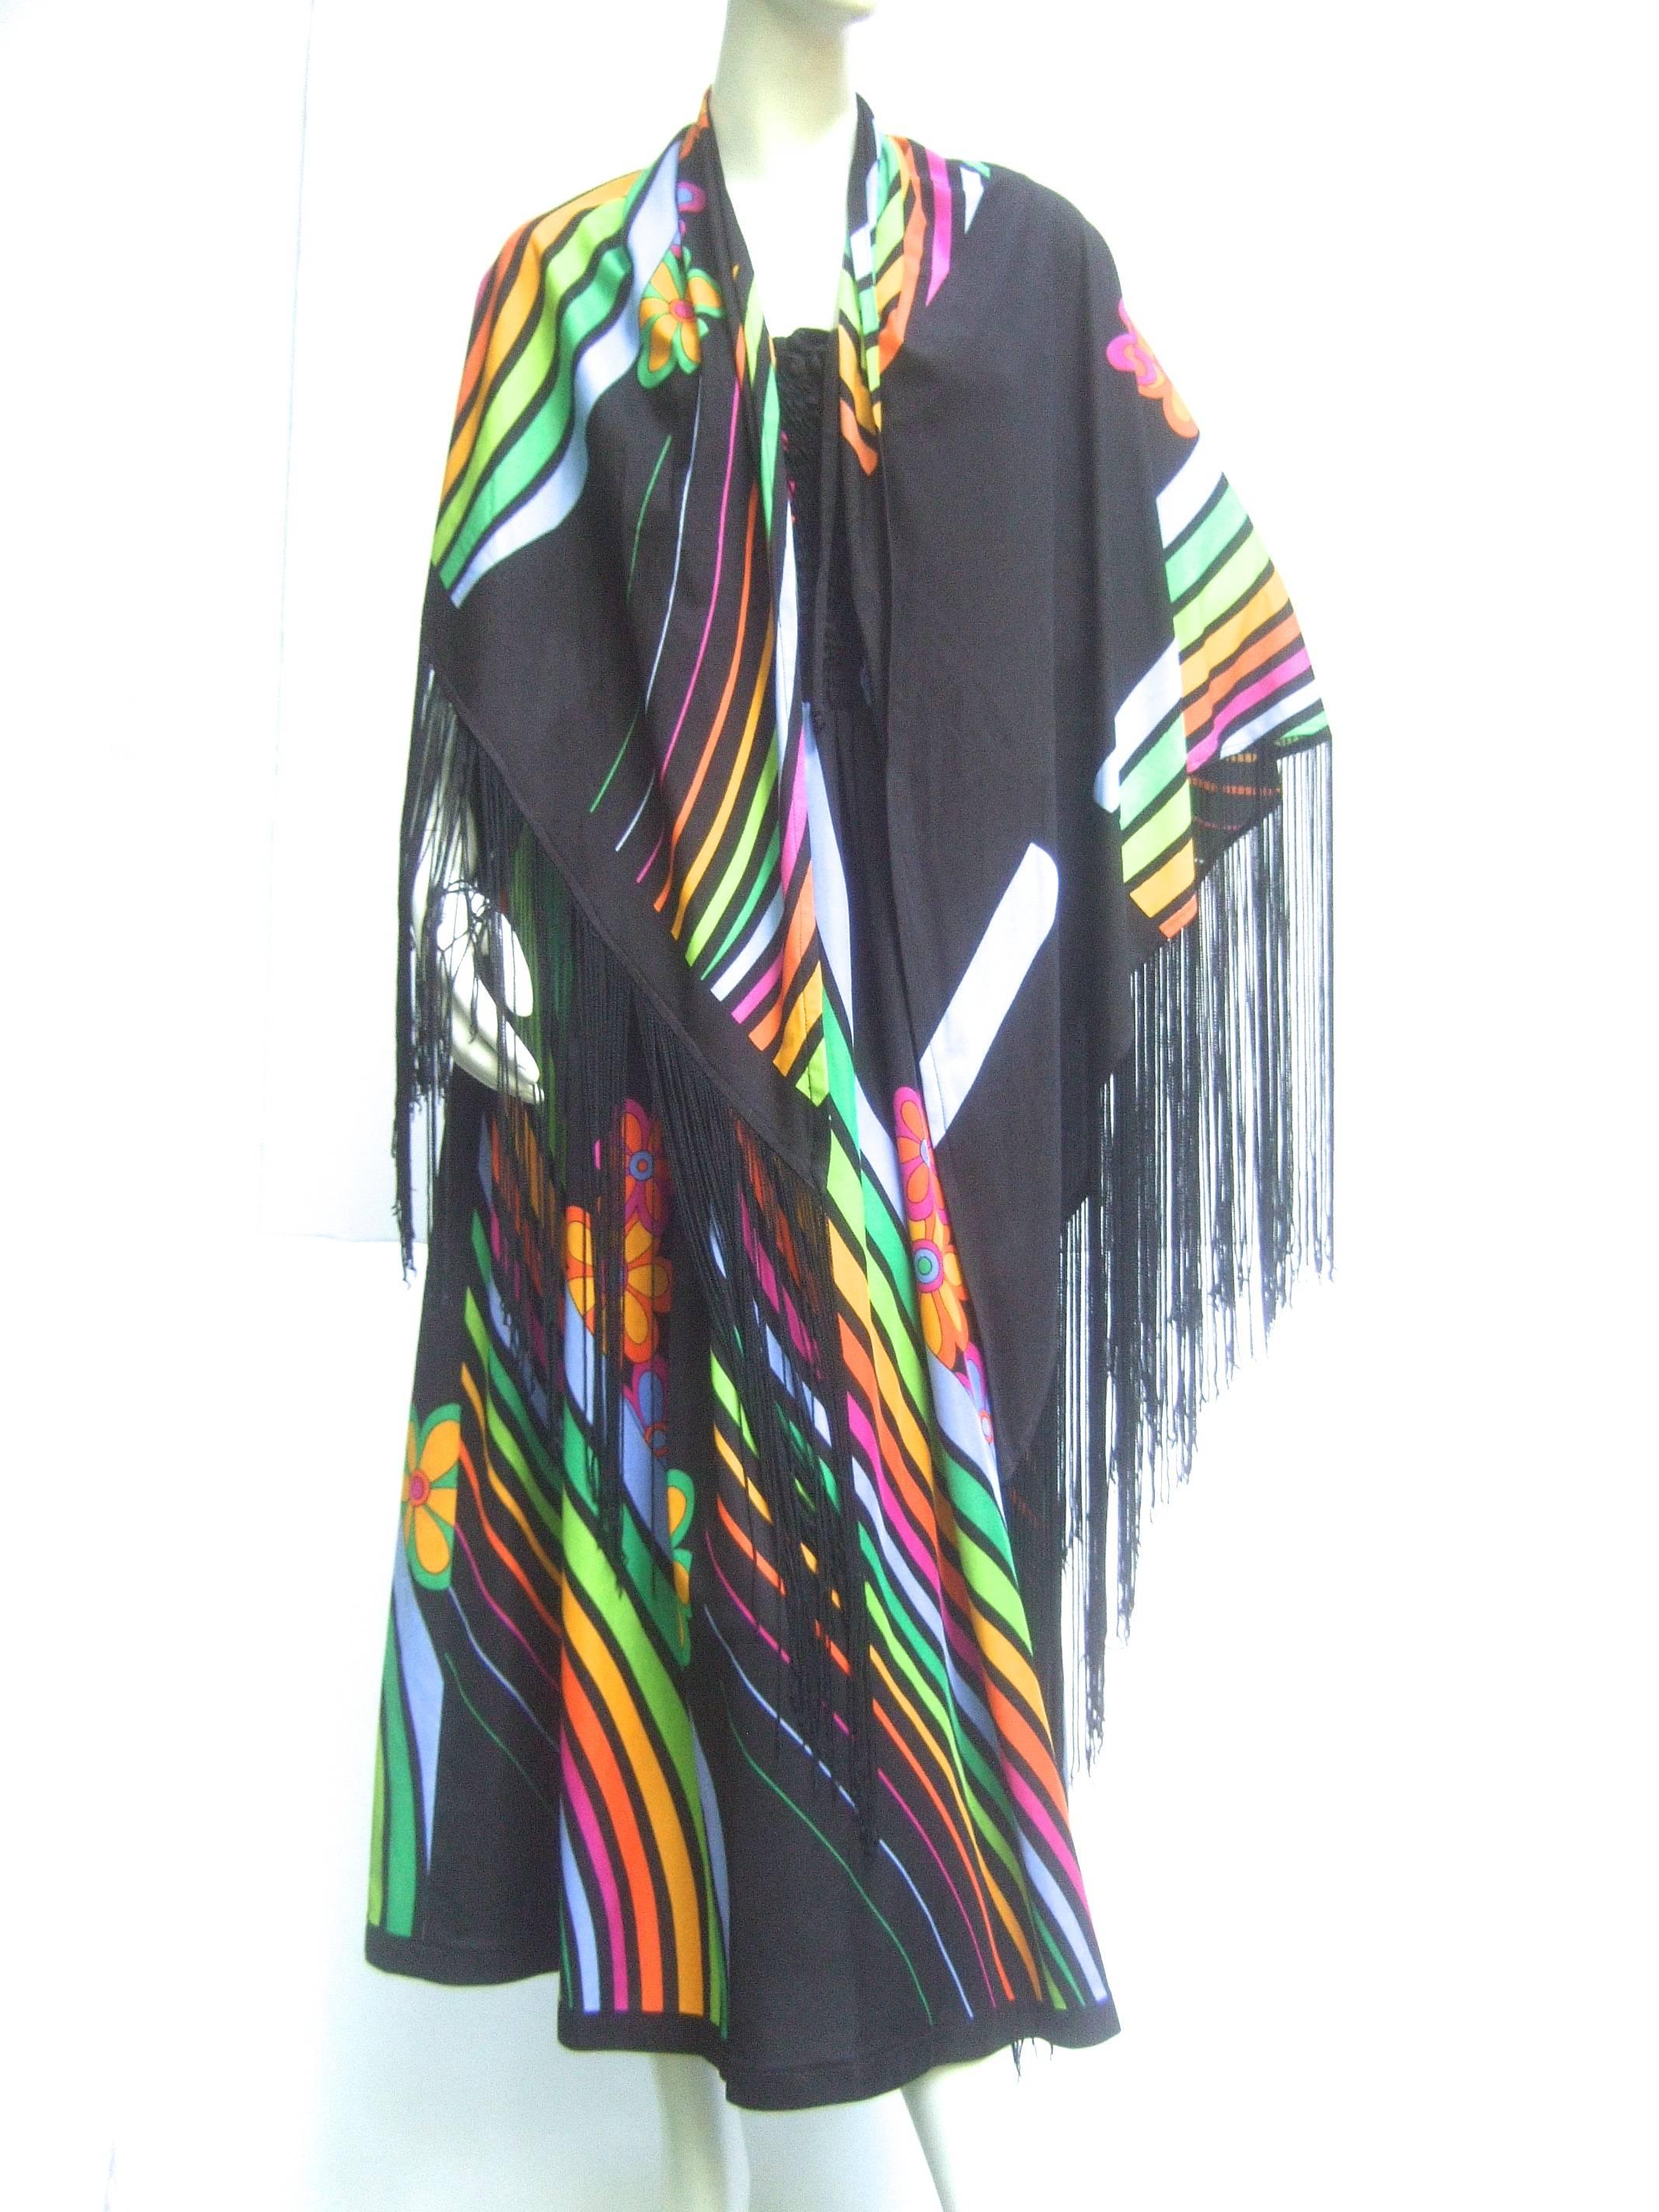 1970's polyester laced bodice dress and matching fringed shawl with amazing graphics. Rainbows of color, floral touches, and artfully plainer areas make for a truly unusual piece. Can be worn so many ways. A fab sundress on it's own, dressed up with